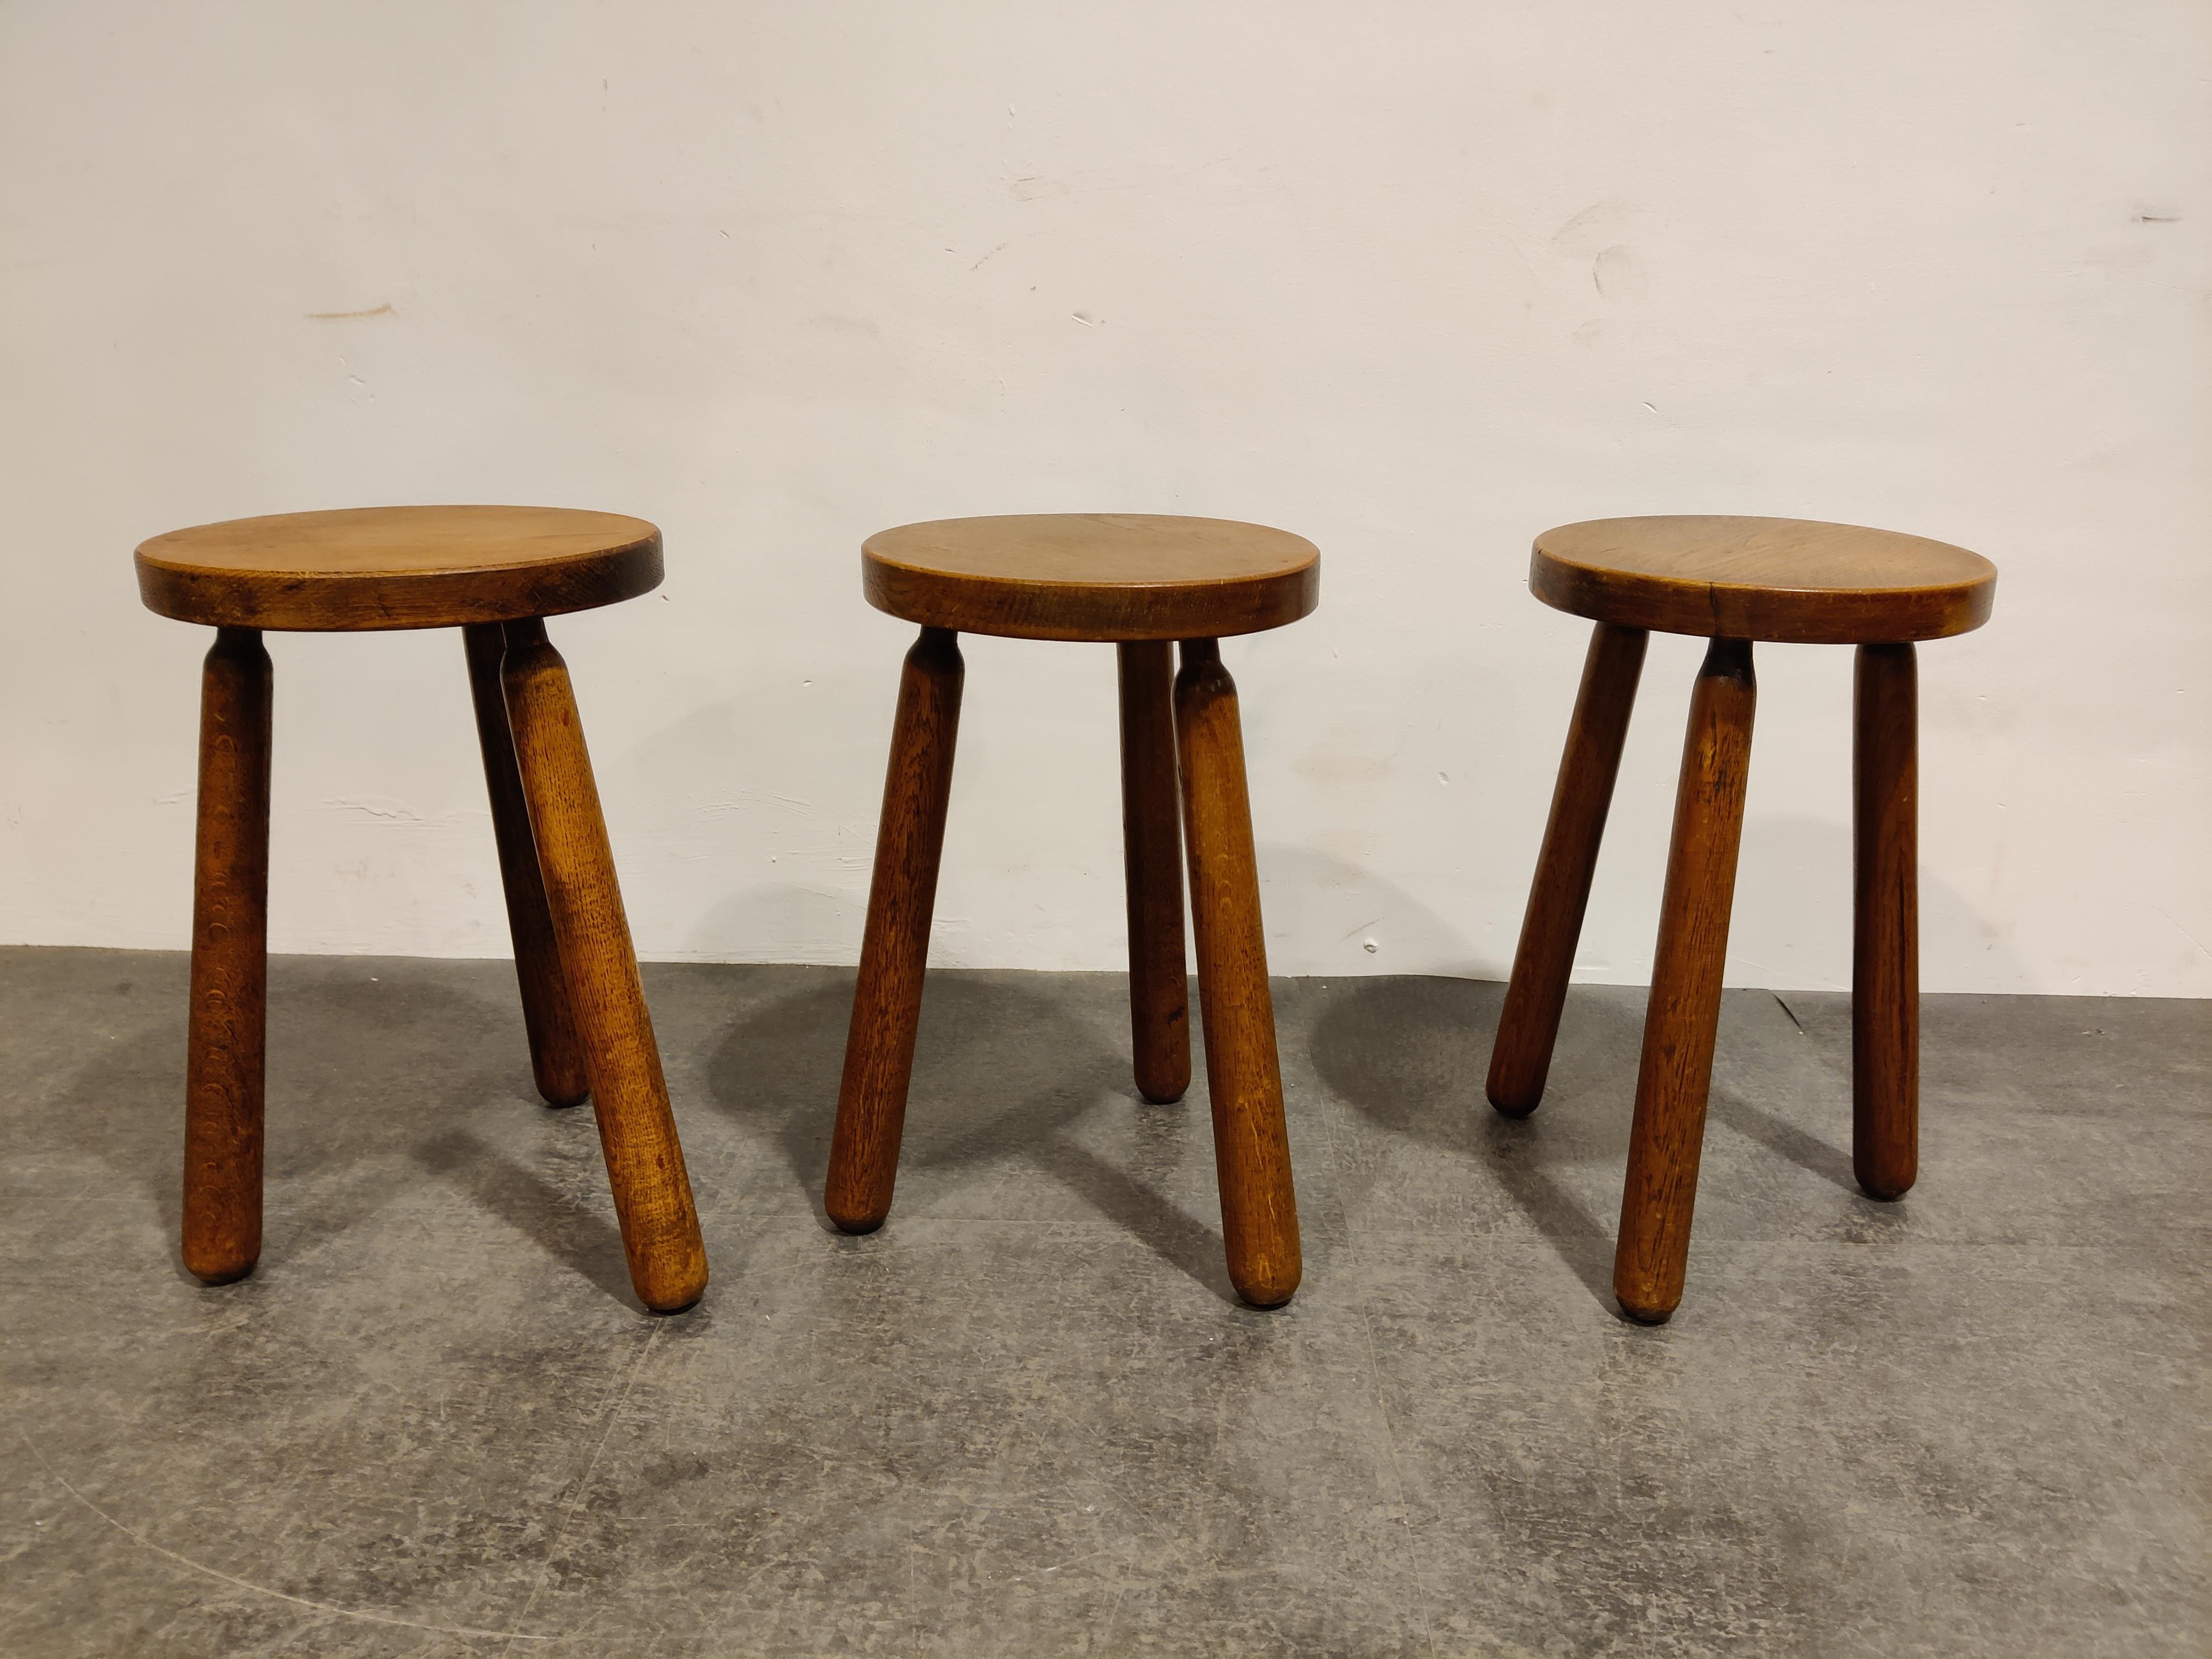 Elegant tripod wooden stools, set of 3

Made in Belgium

Dimensions:
Height: 48cm/18.89